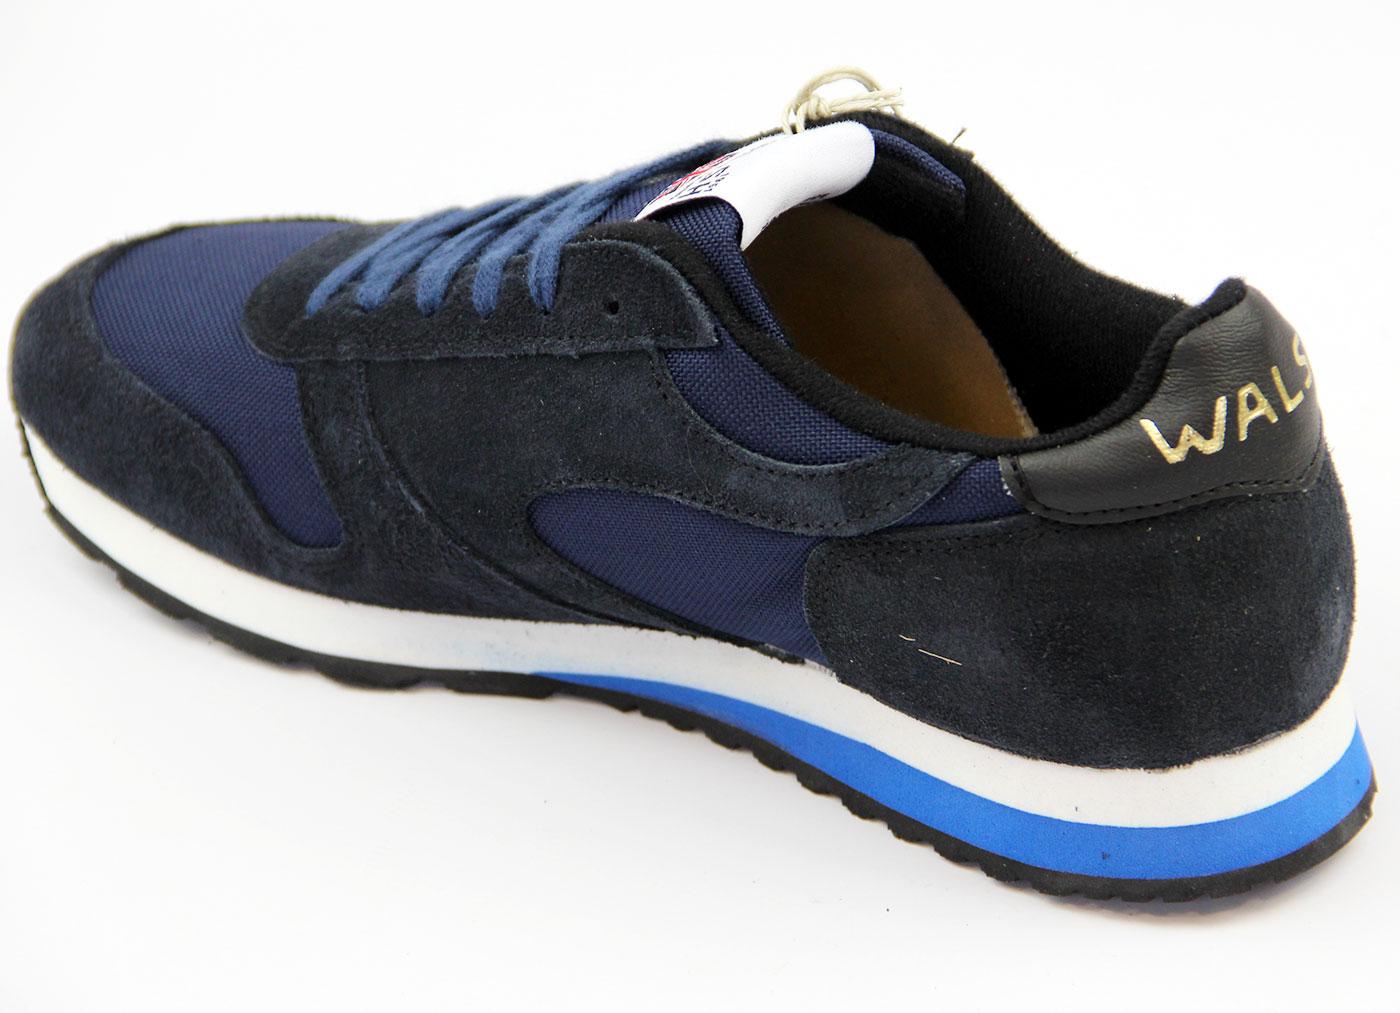 NORMAN WALSH Seoul '88 Retro Indie Running Trainers Navy 1988